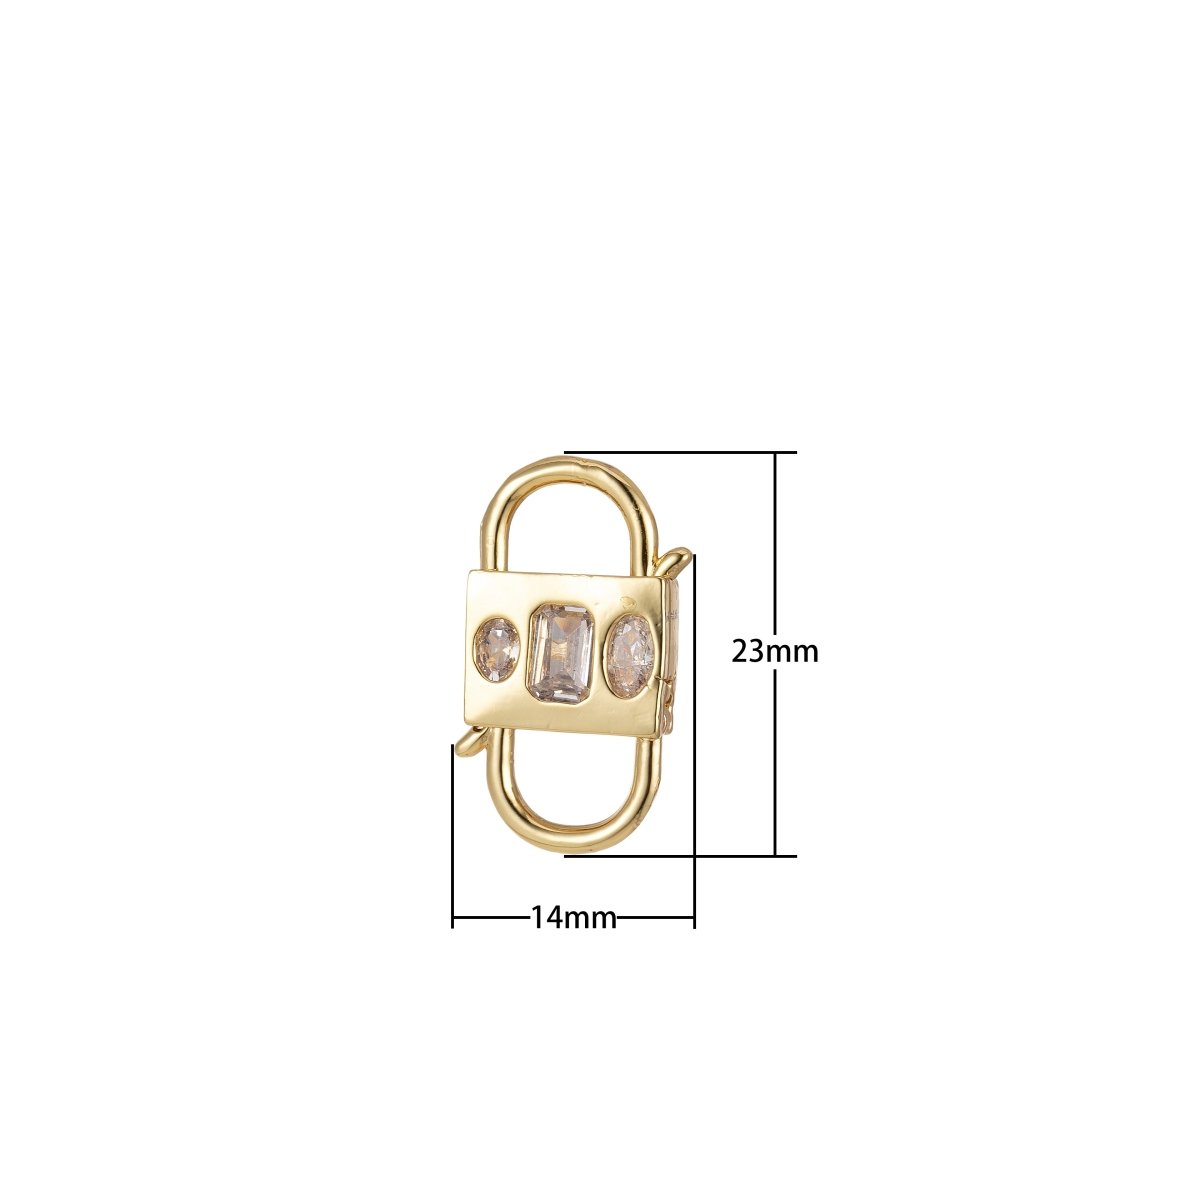 Tiny Gold CZ Micro Pave Clasp Lock, Interlock Cubic Clasp Fastener for Bracelet Necklace Clear Cz Supply L-348 - DLUXCA